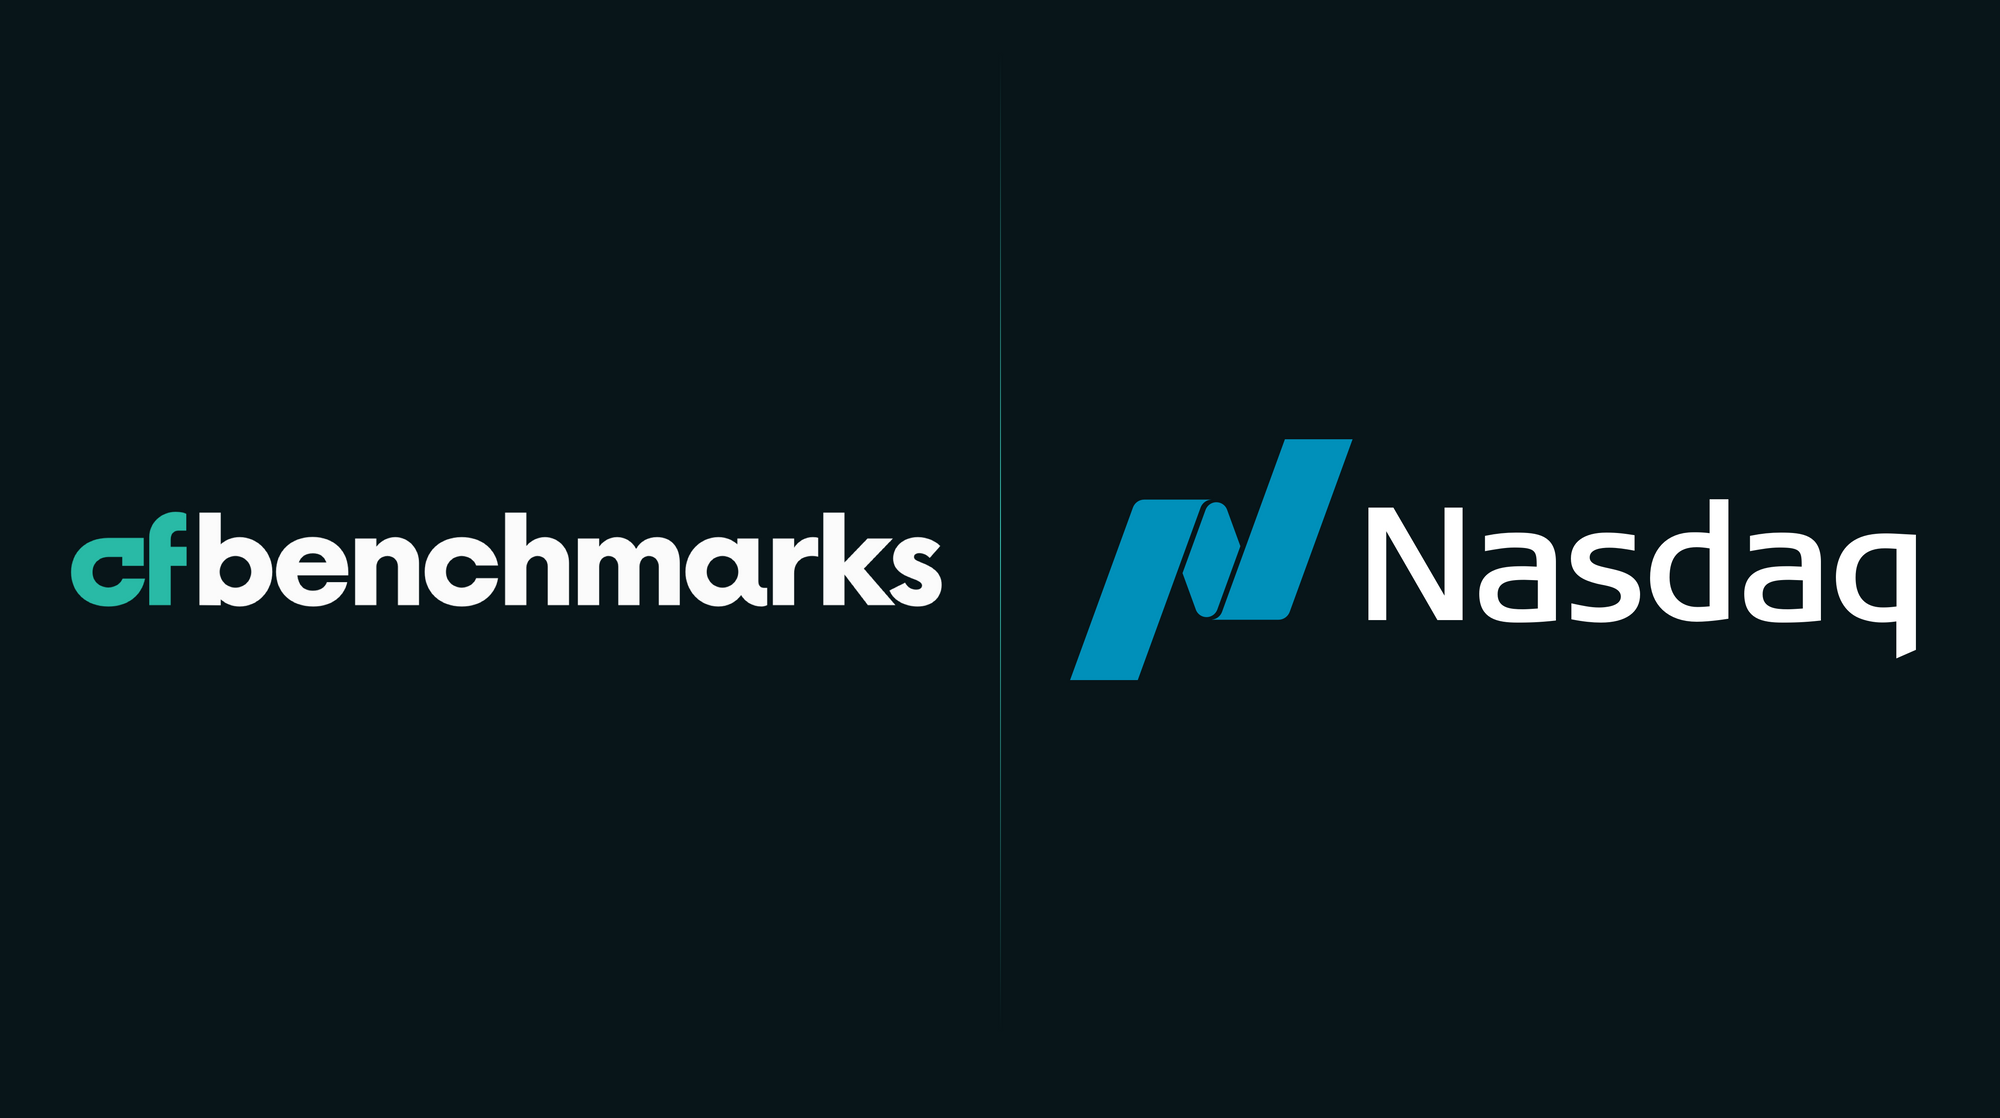 CF Benchmarks appointed Calculation Agent for Nasdaq Crypto Index (NCI)